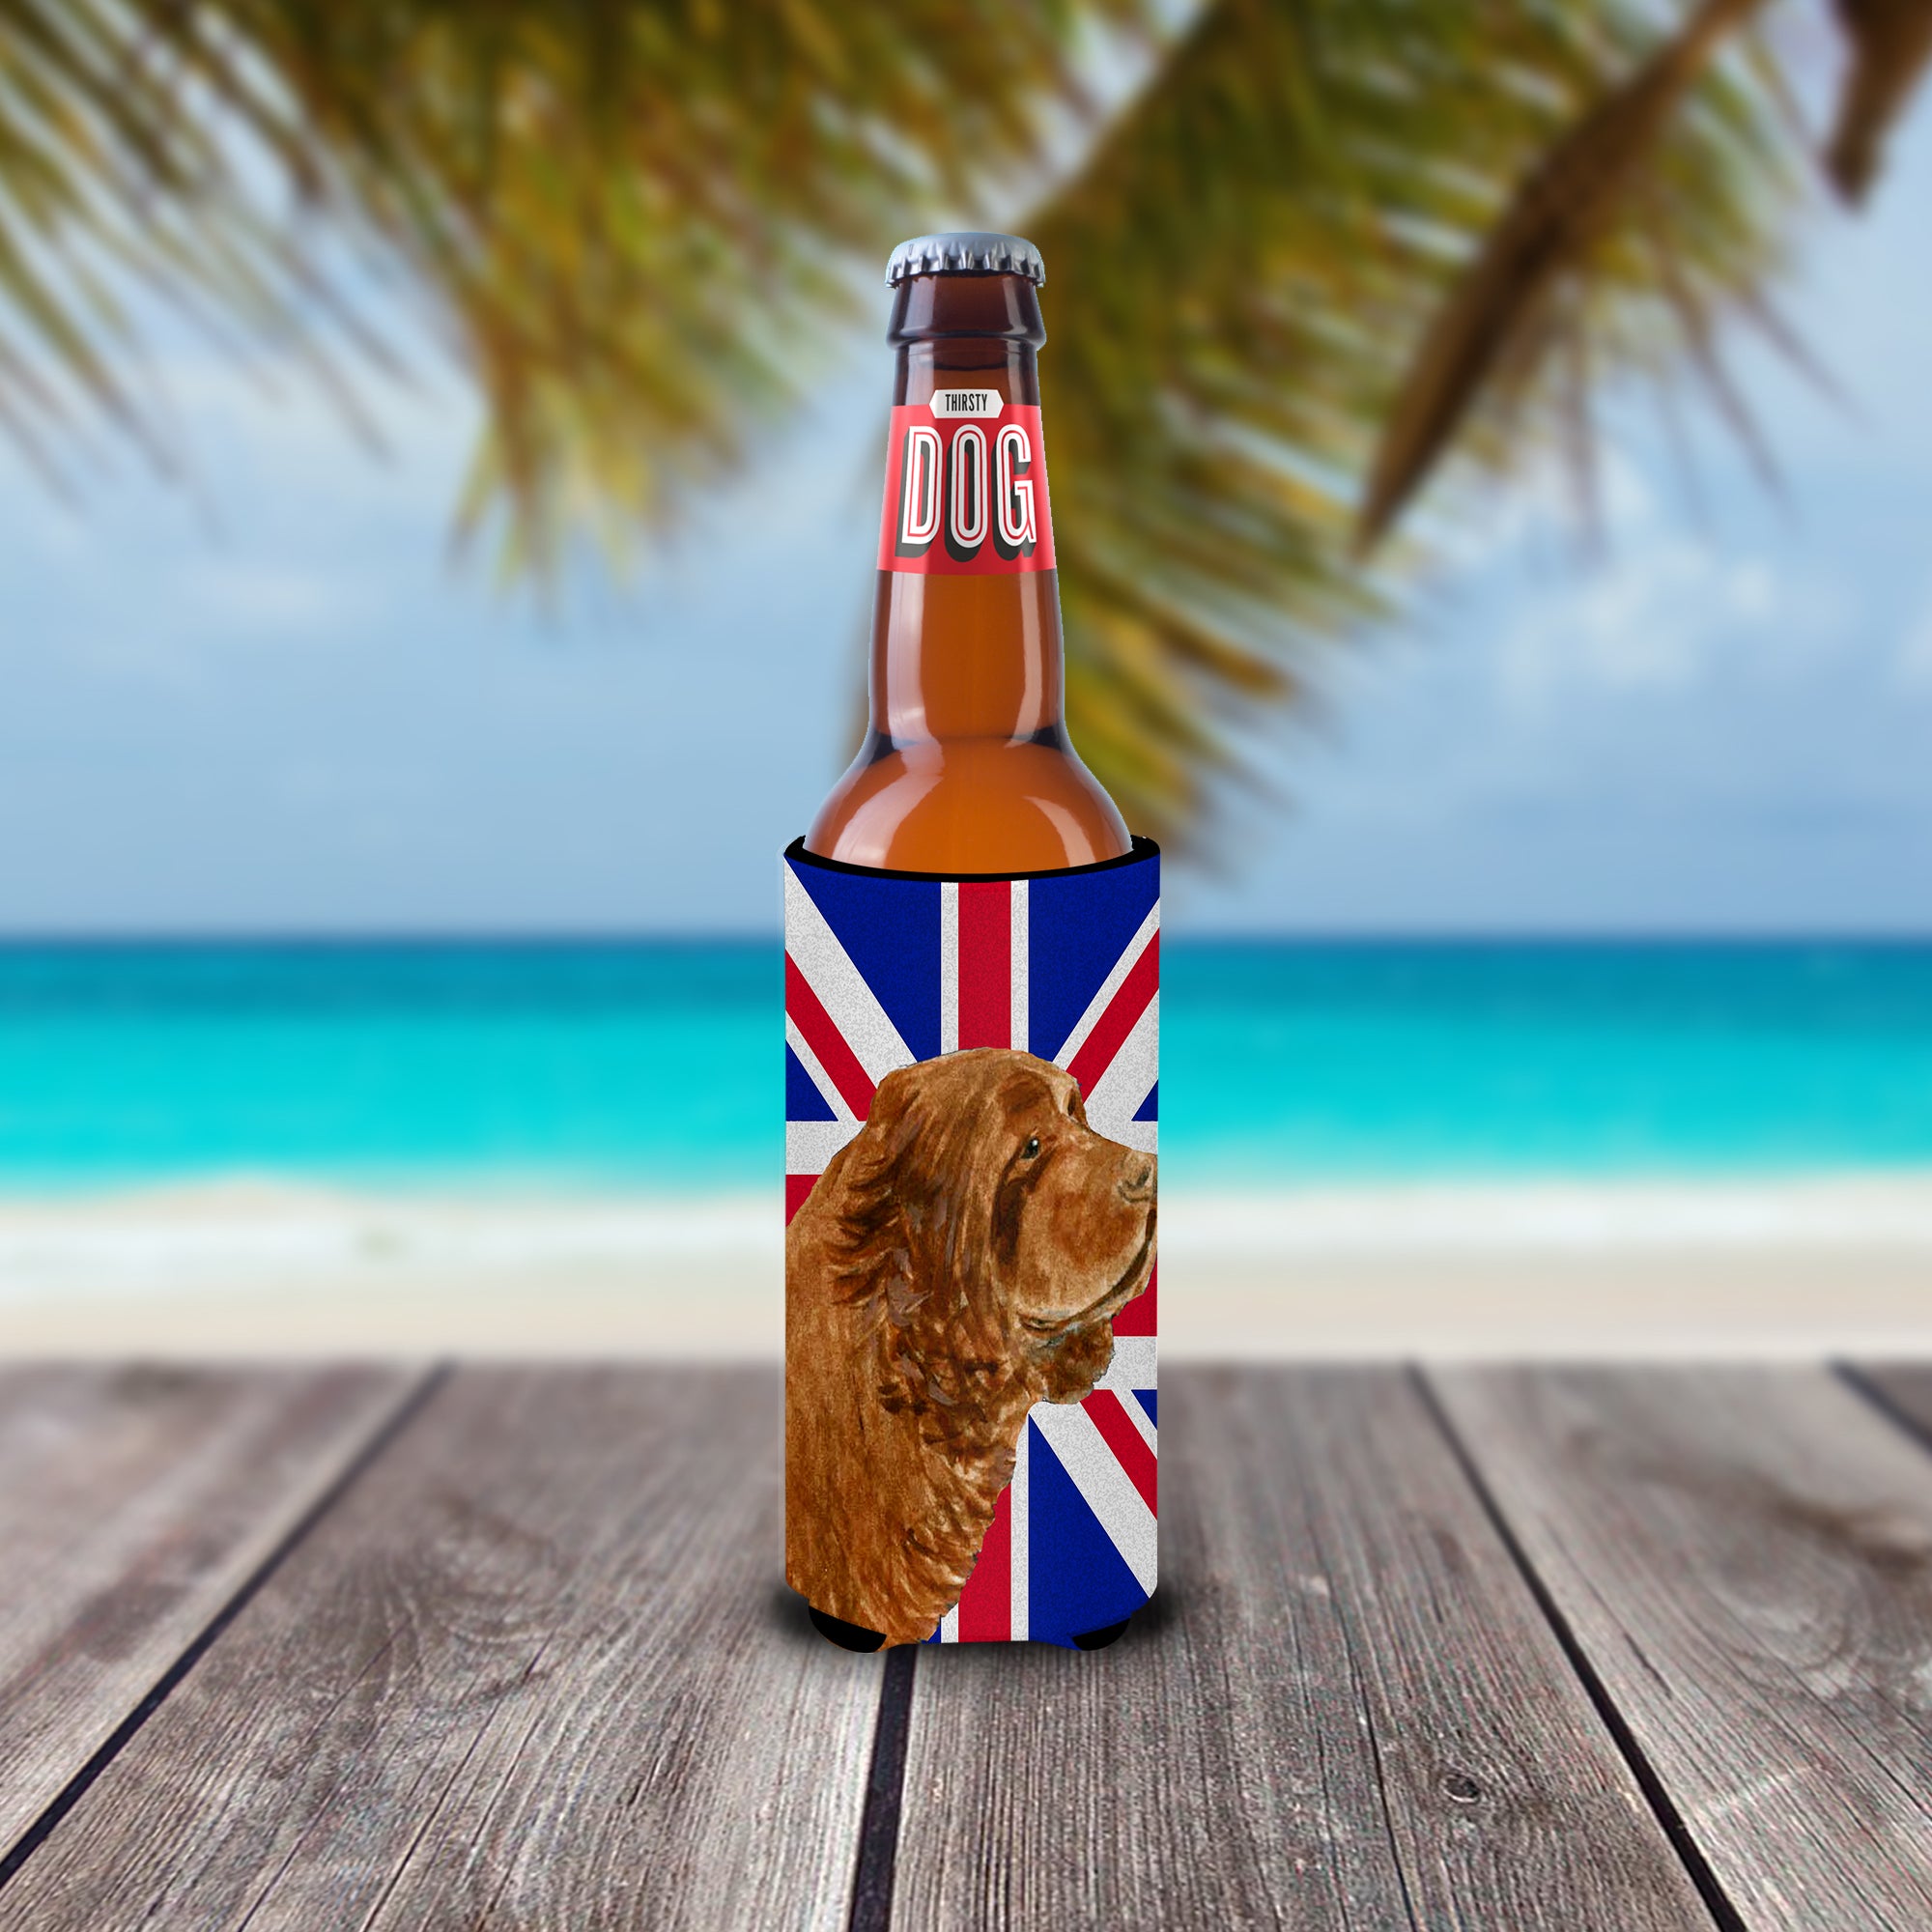 Sussex Spaniel with English Union Jack British Flag Ultra Beverage Insulators for slim cans SS4952MUK